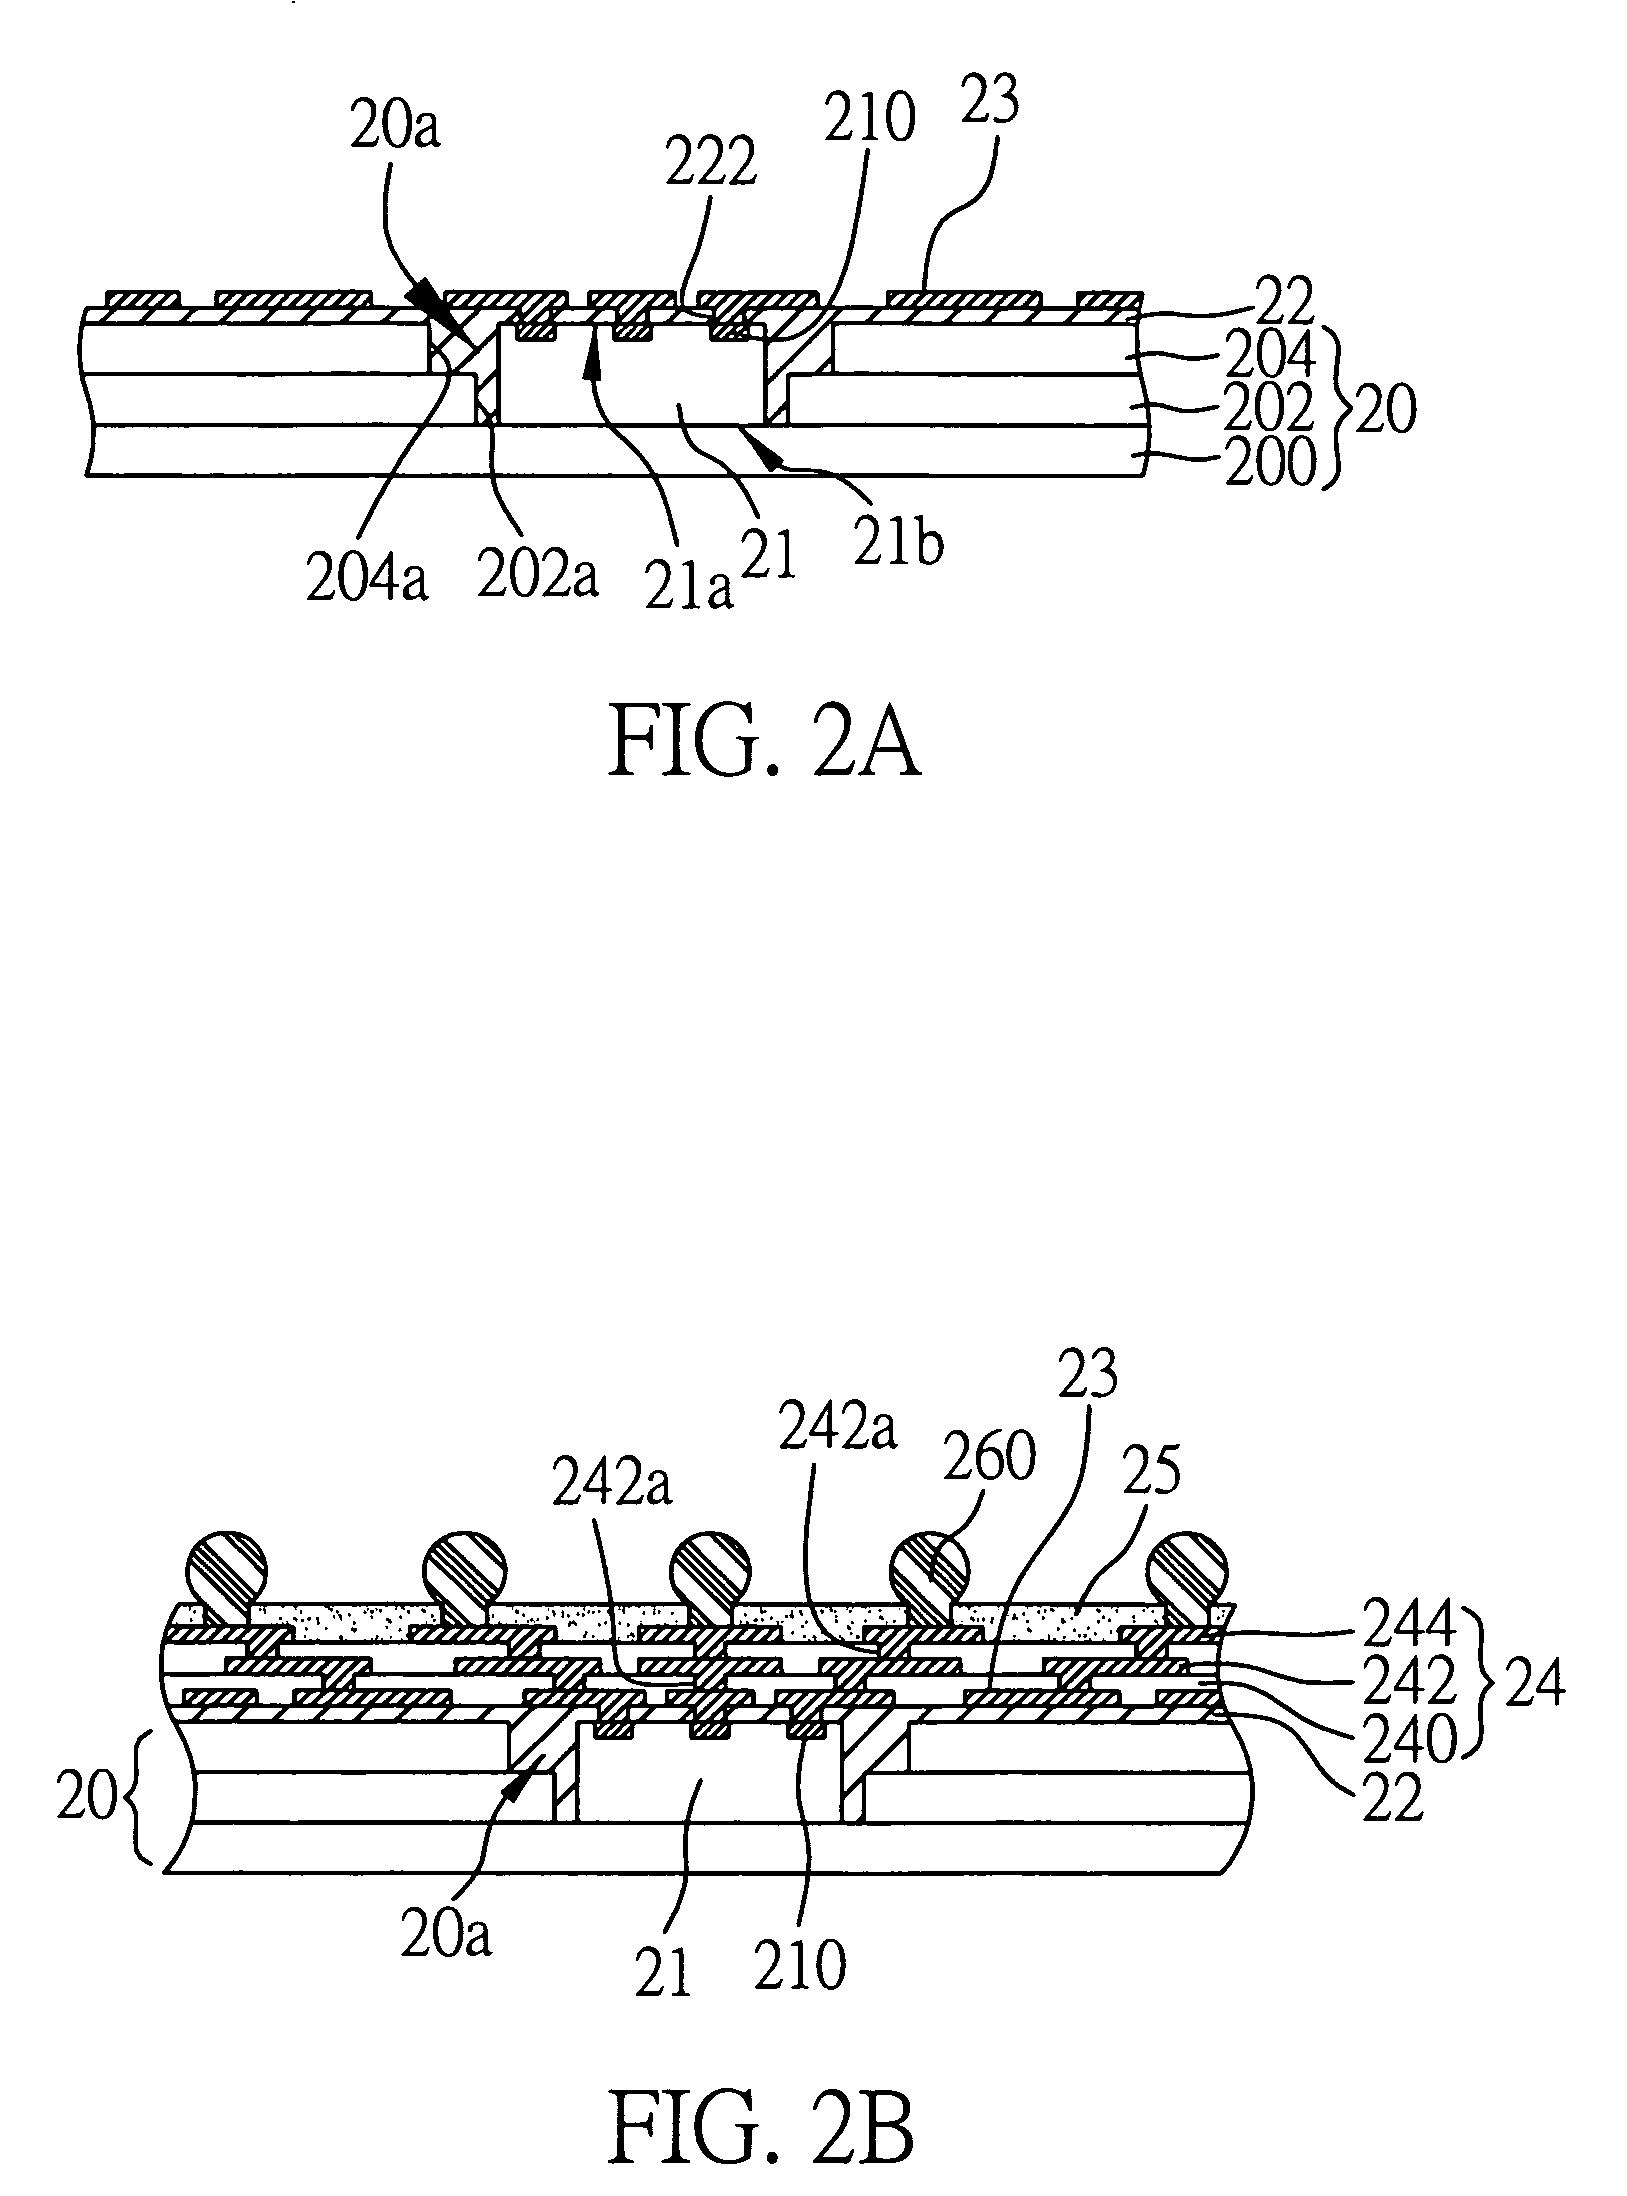 Package structure with chip embedded in substrate